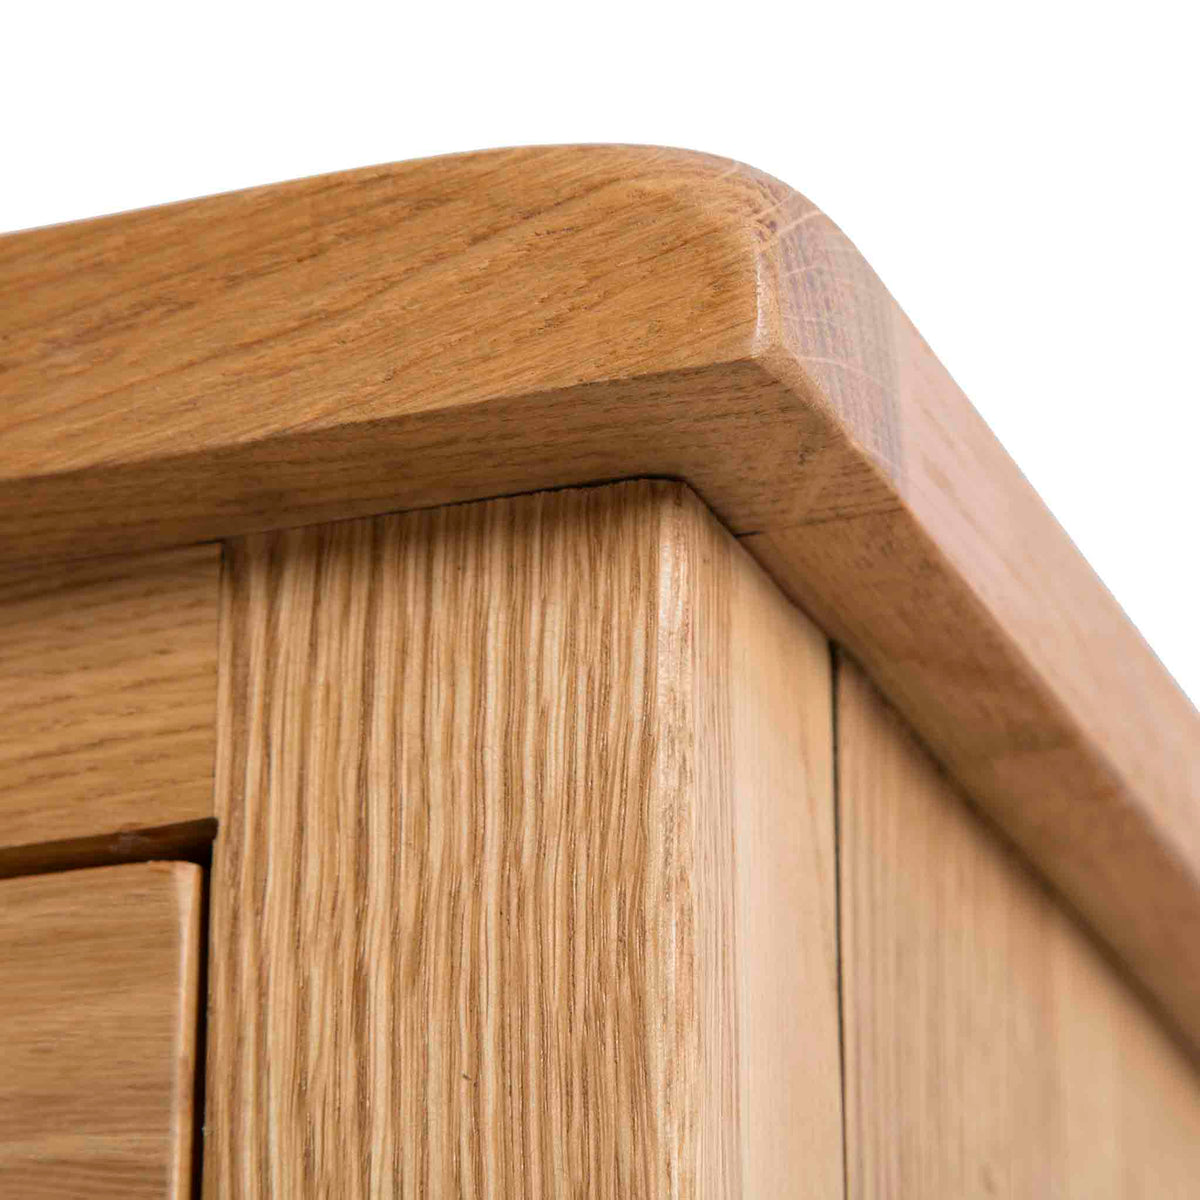  Surrey Oak 2 Over 4 Chest of Drawers - Close up of top corner